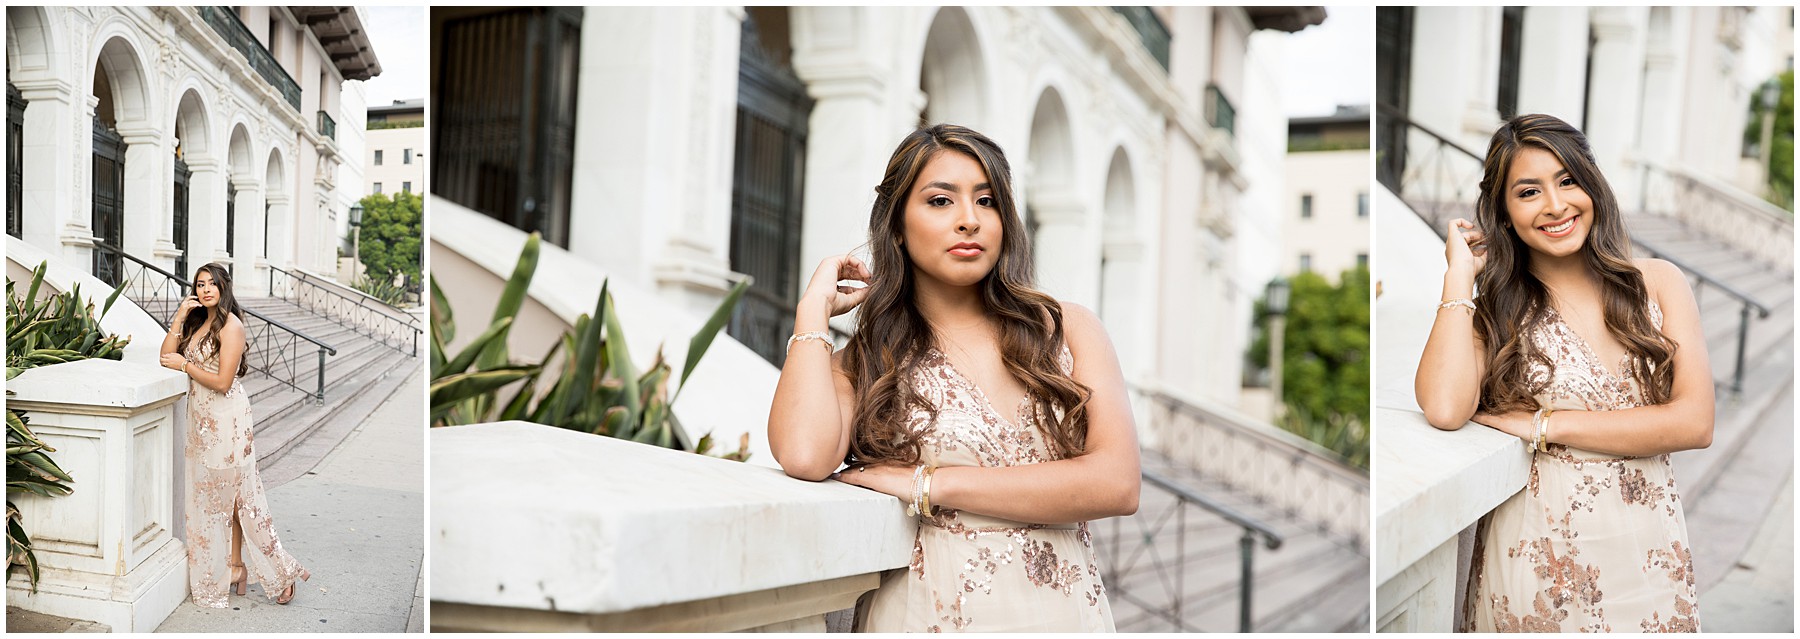 fun and elegant senior pictures outfit ideas in pasadena tara rochelle photography